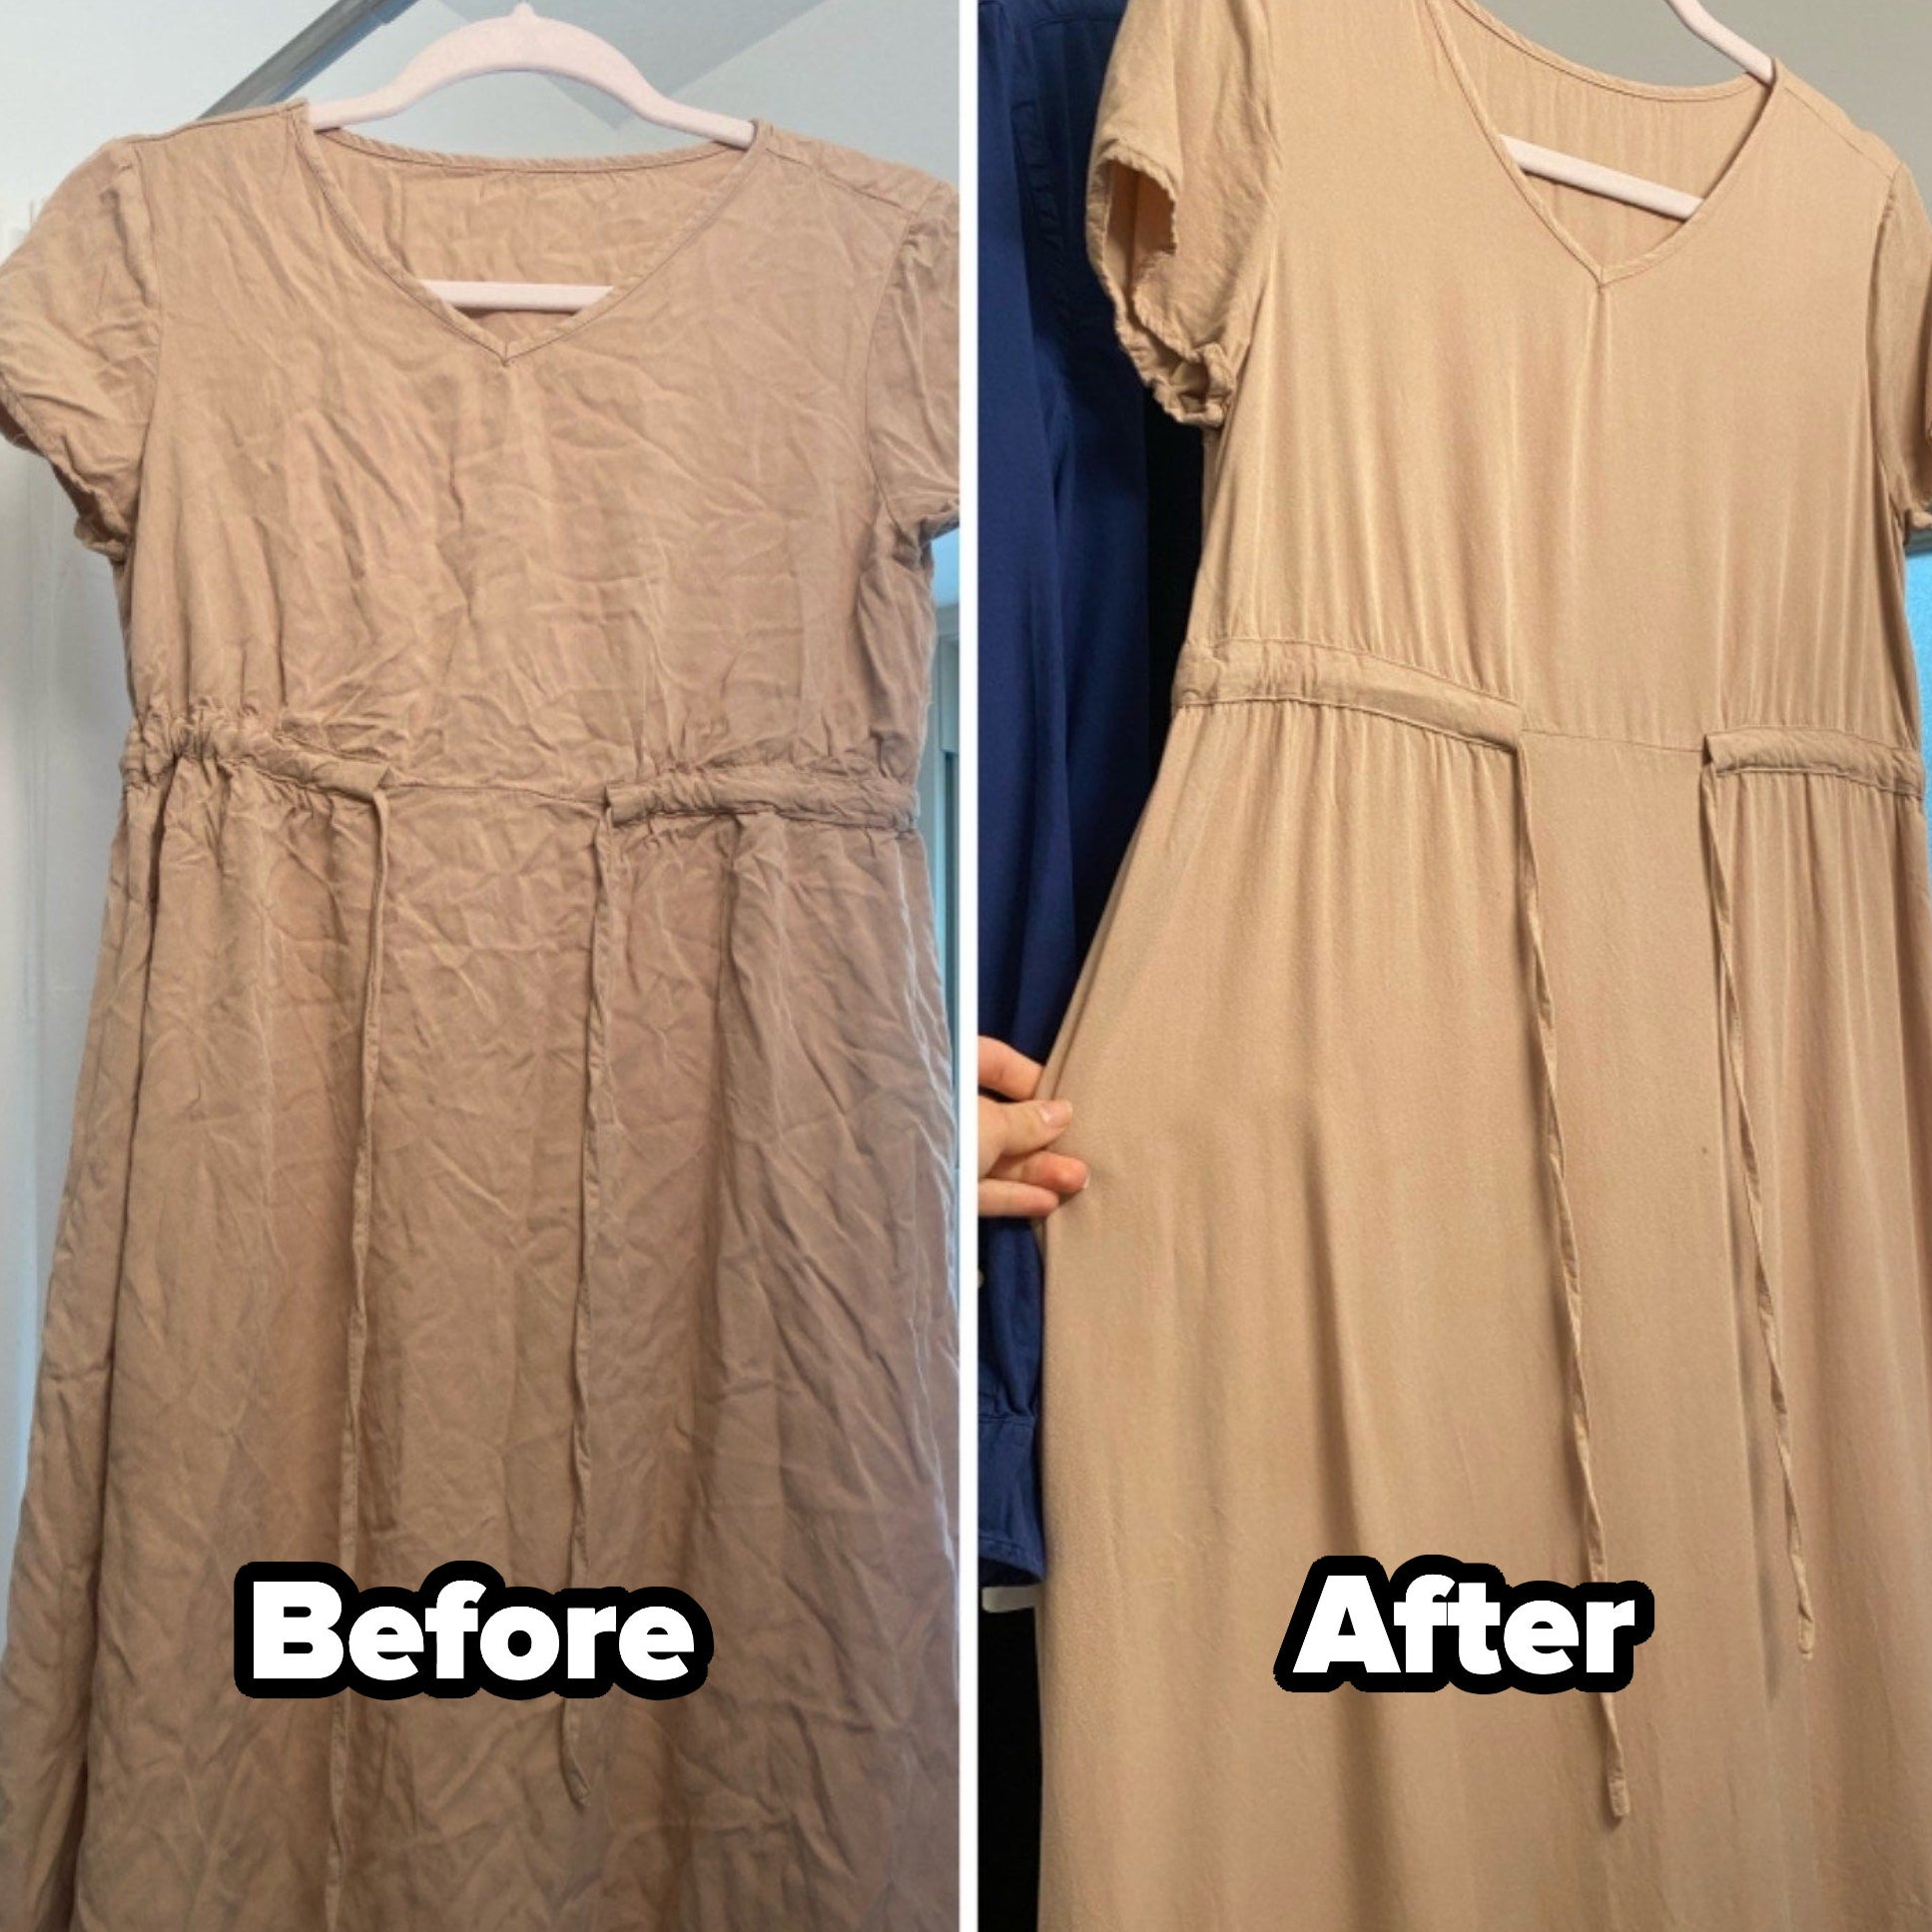 a reviewer image of a wrinkly dress before using the spray, and the same dress after using the spray